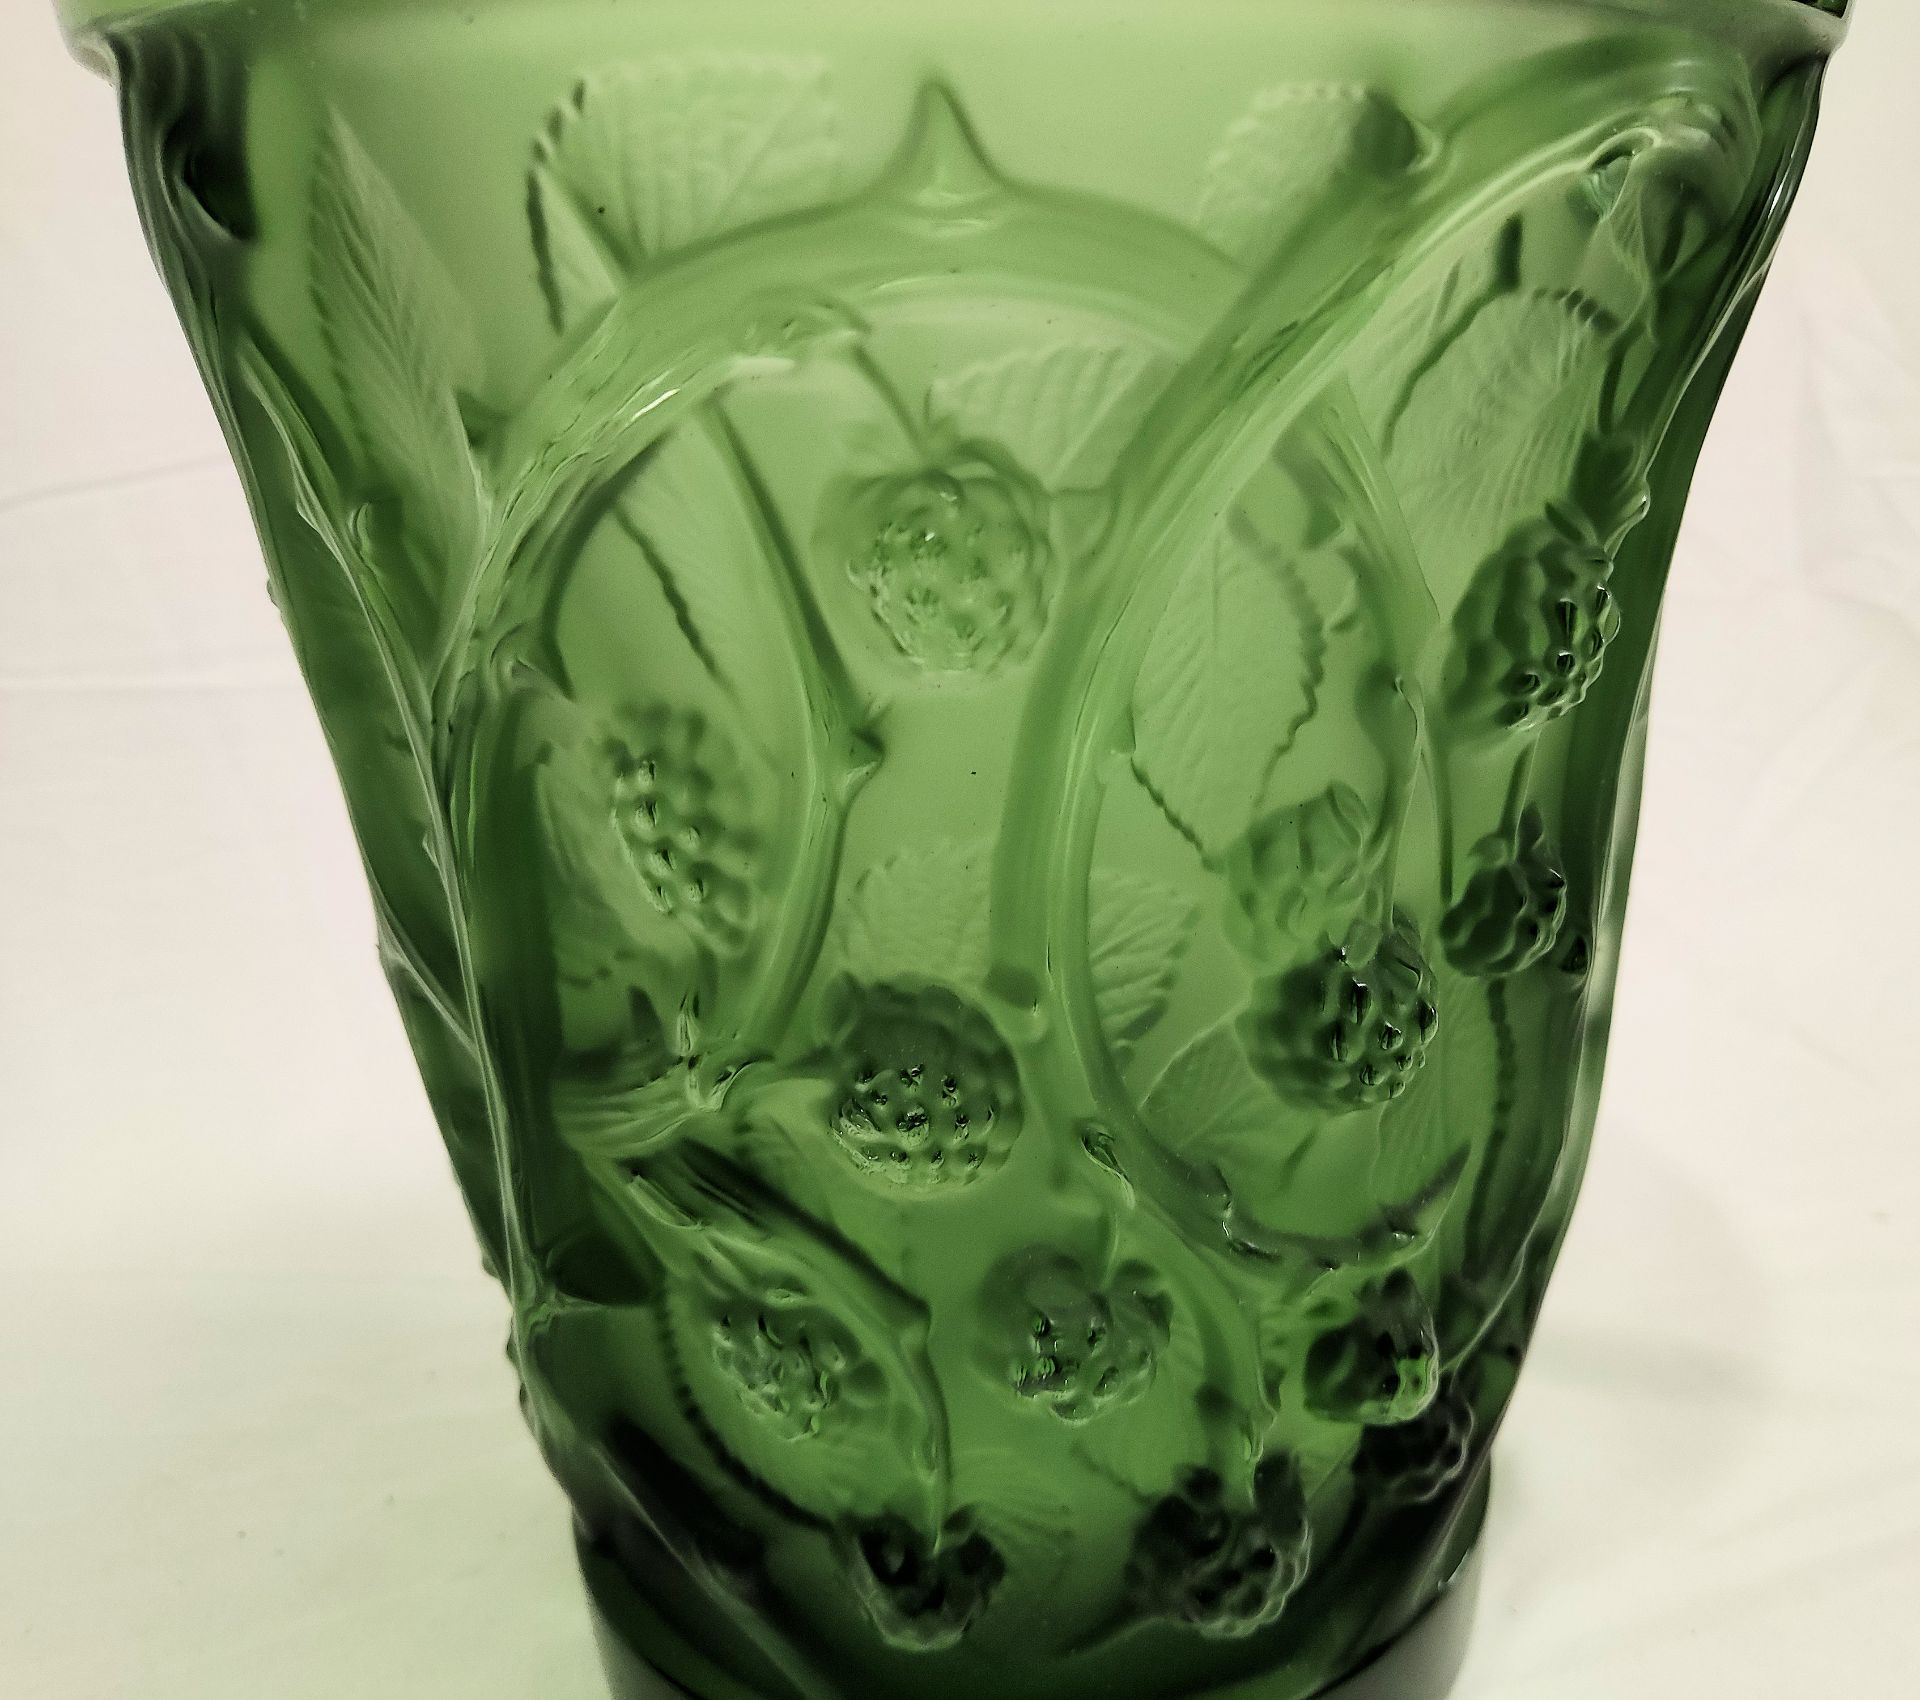 1 x LALIQUE 'Mures' Exquisite Handcrafted French Green Crystal Medium Vase - Original RRP £2,690 - Image 6 of 23